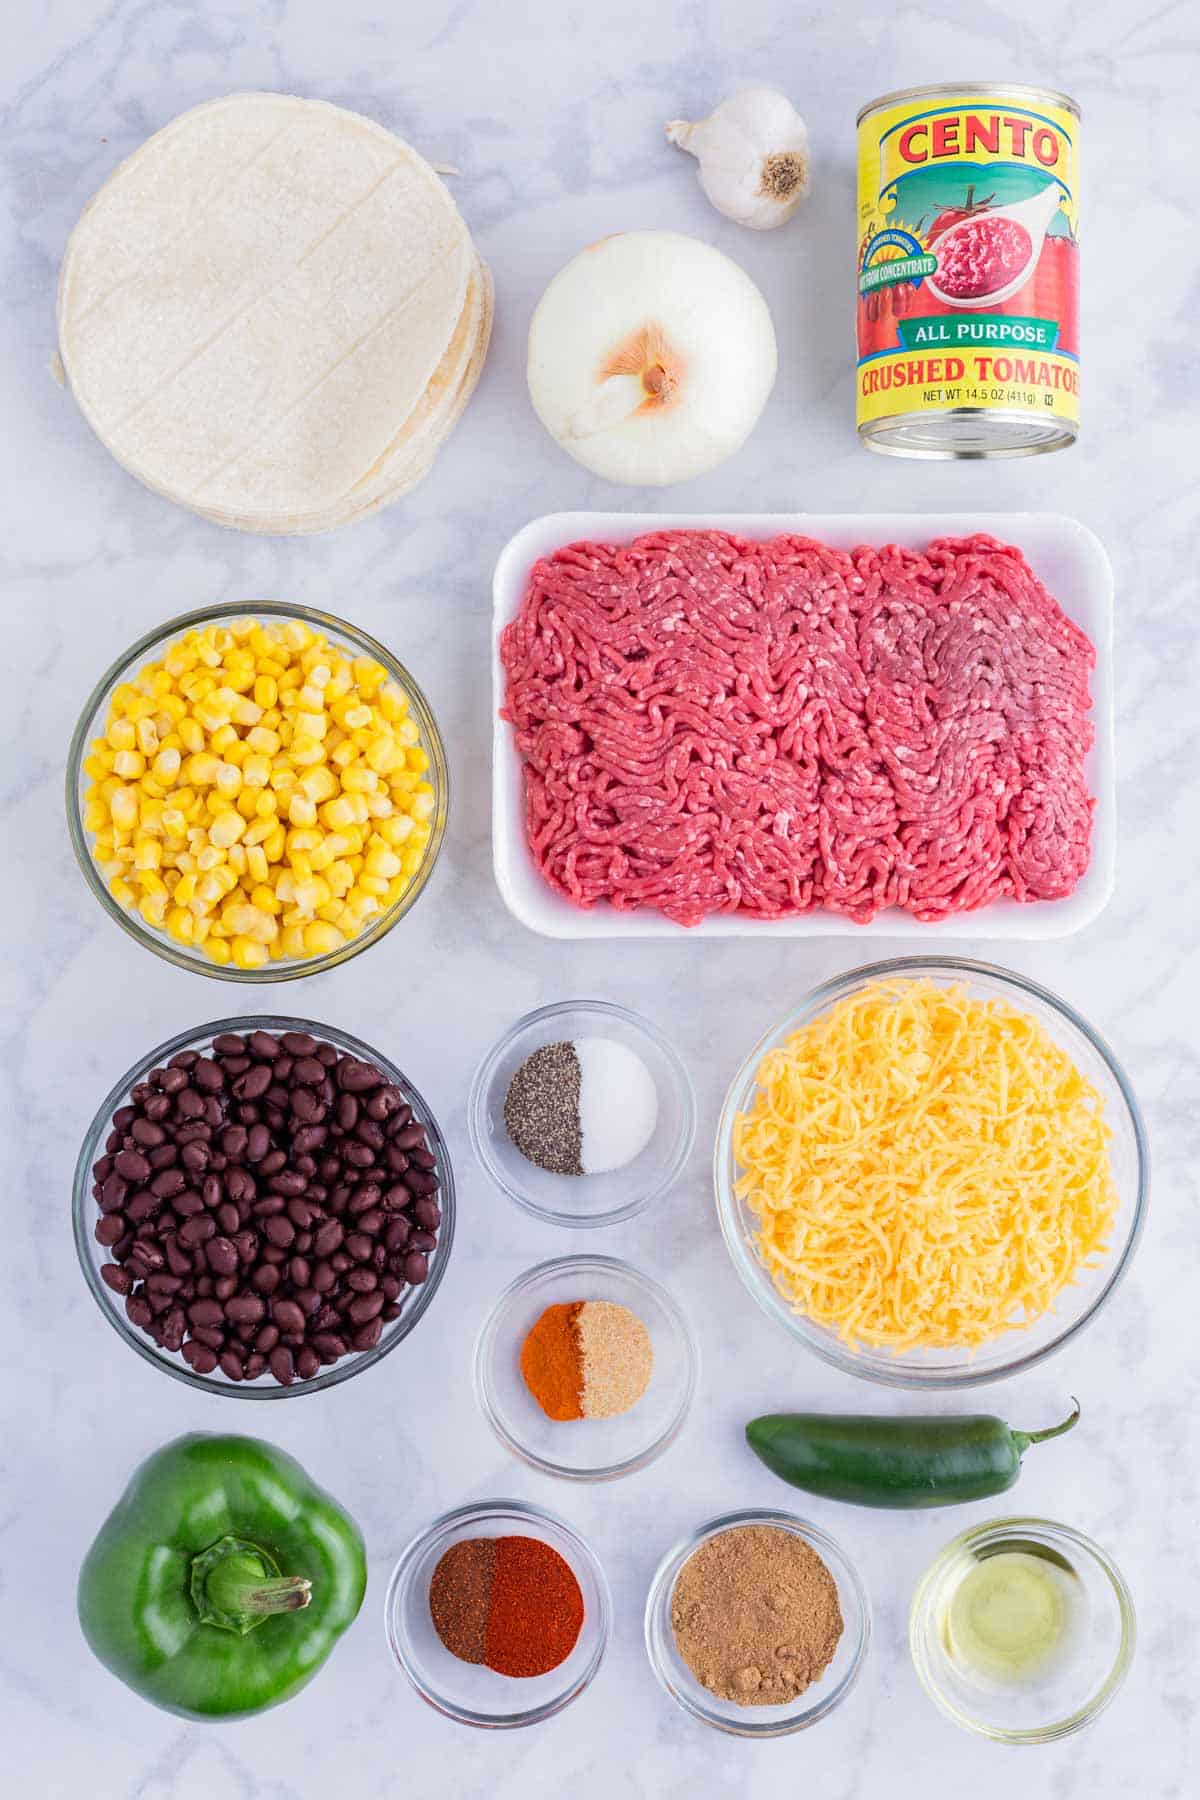 Ground beef, black beans, corn, cheese, corn tortillas, veggies, and taco seasoning are the main ingredients for this dish.